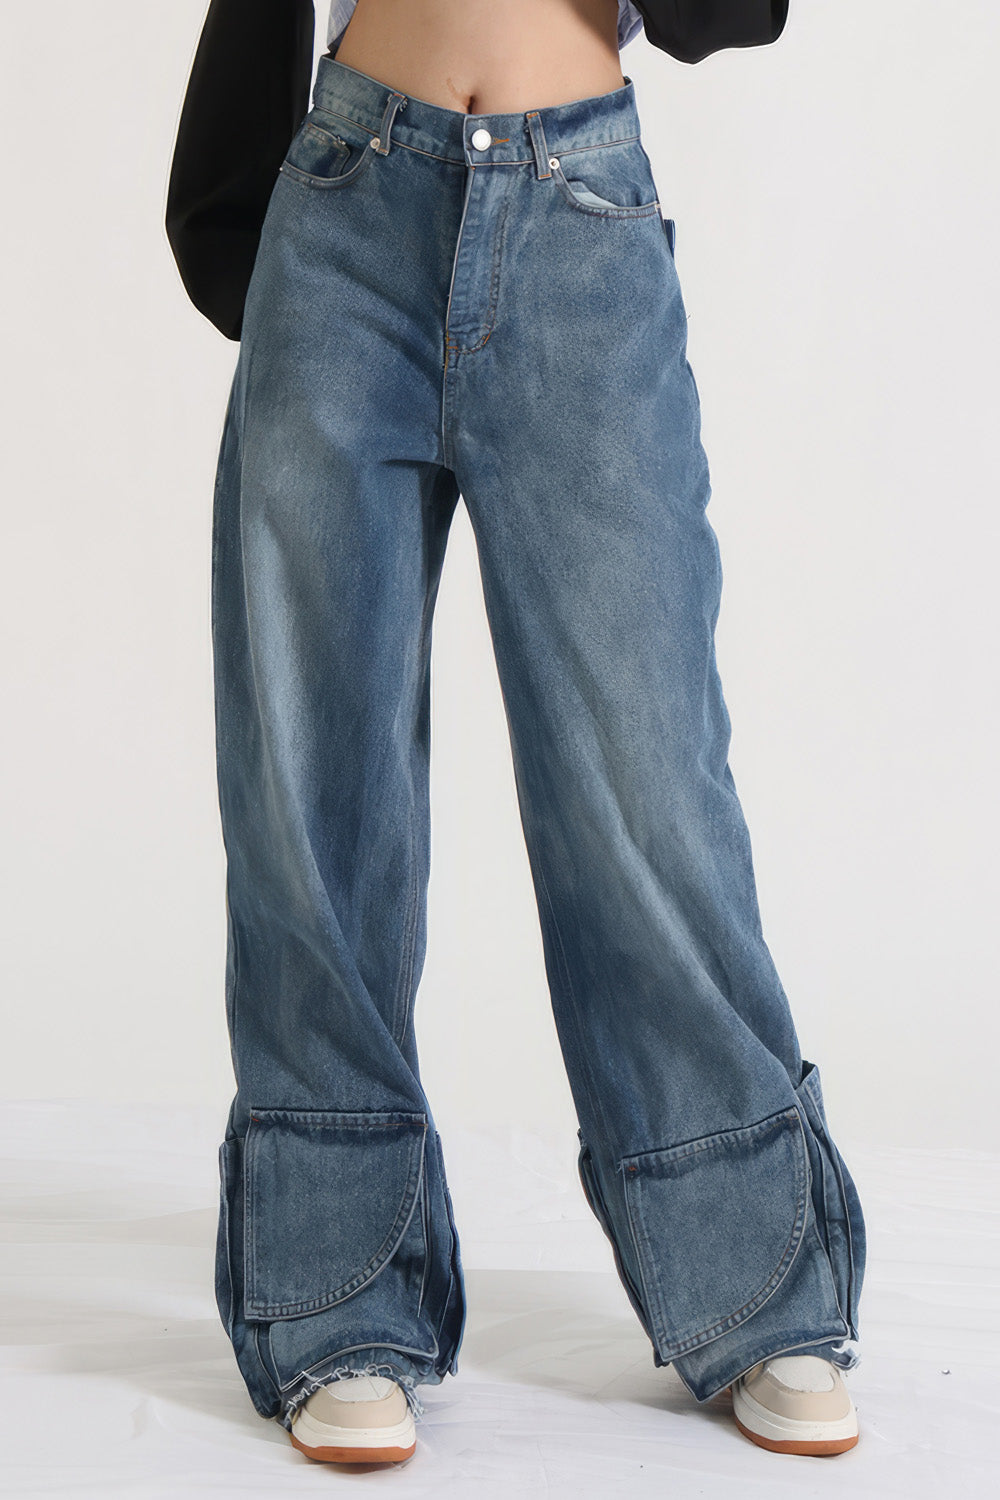 High Waisted Jeans with Pockets at Hem - Blue